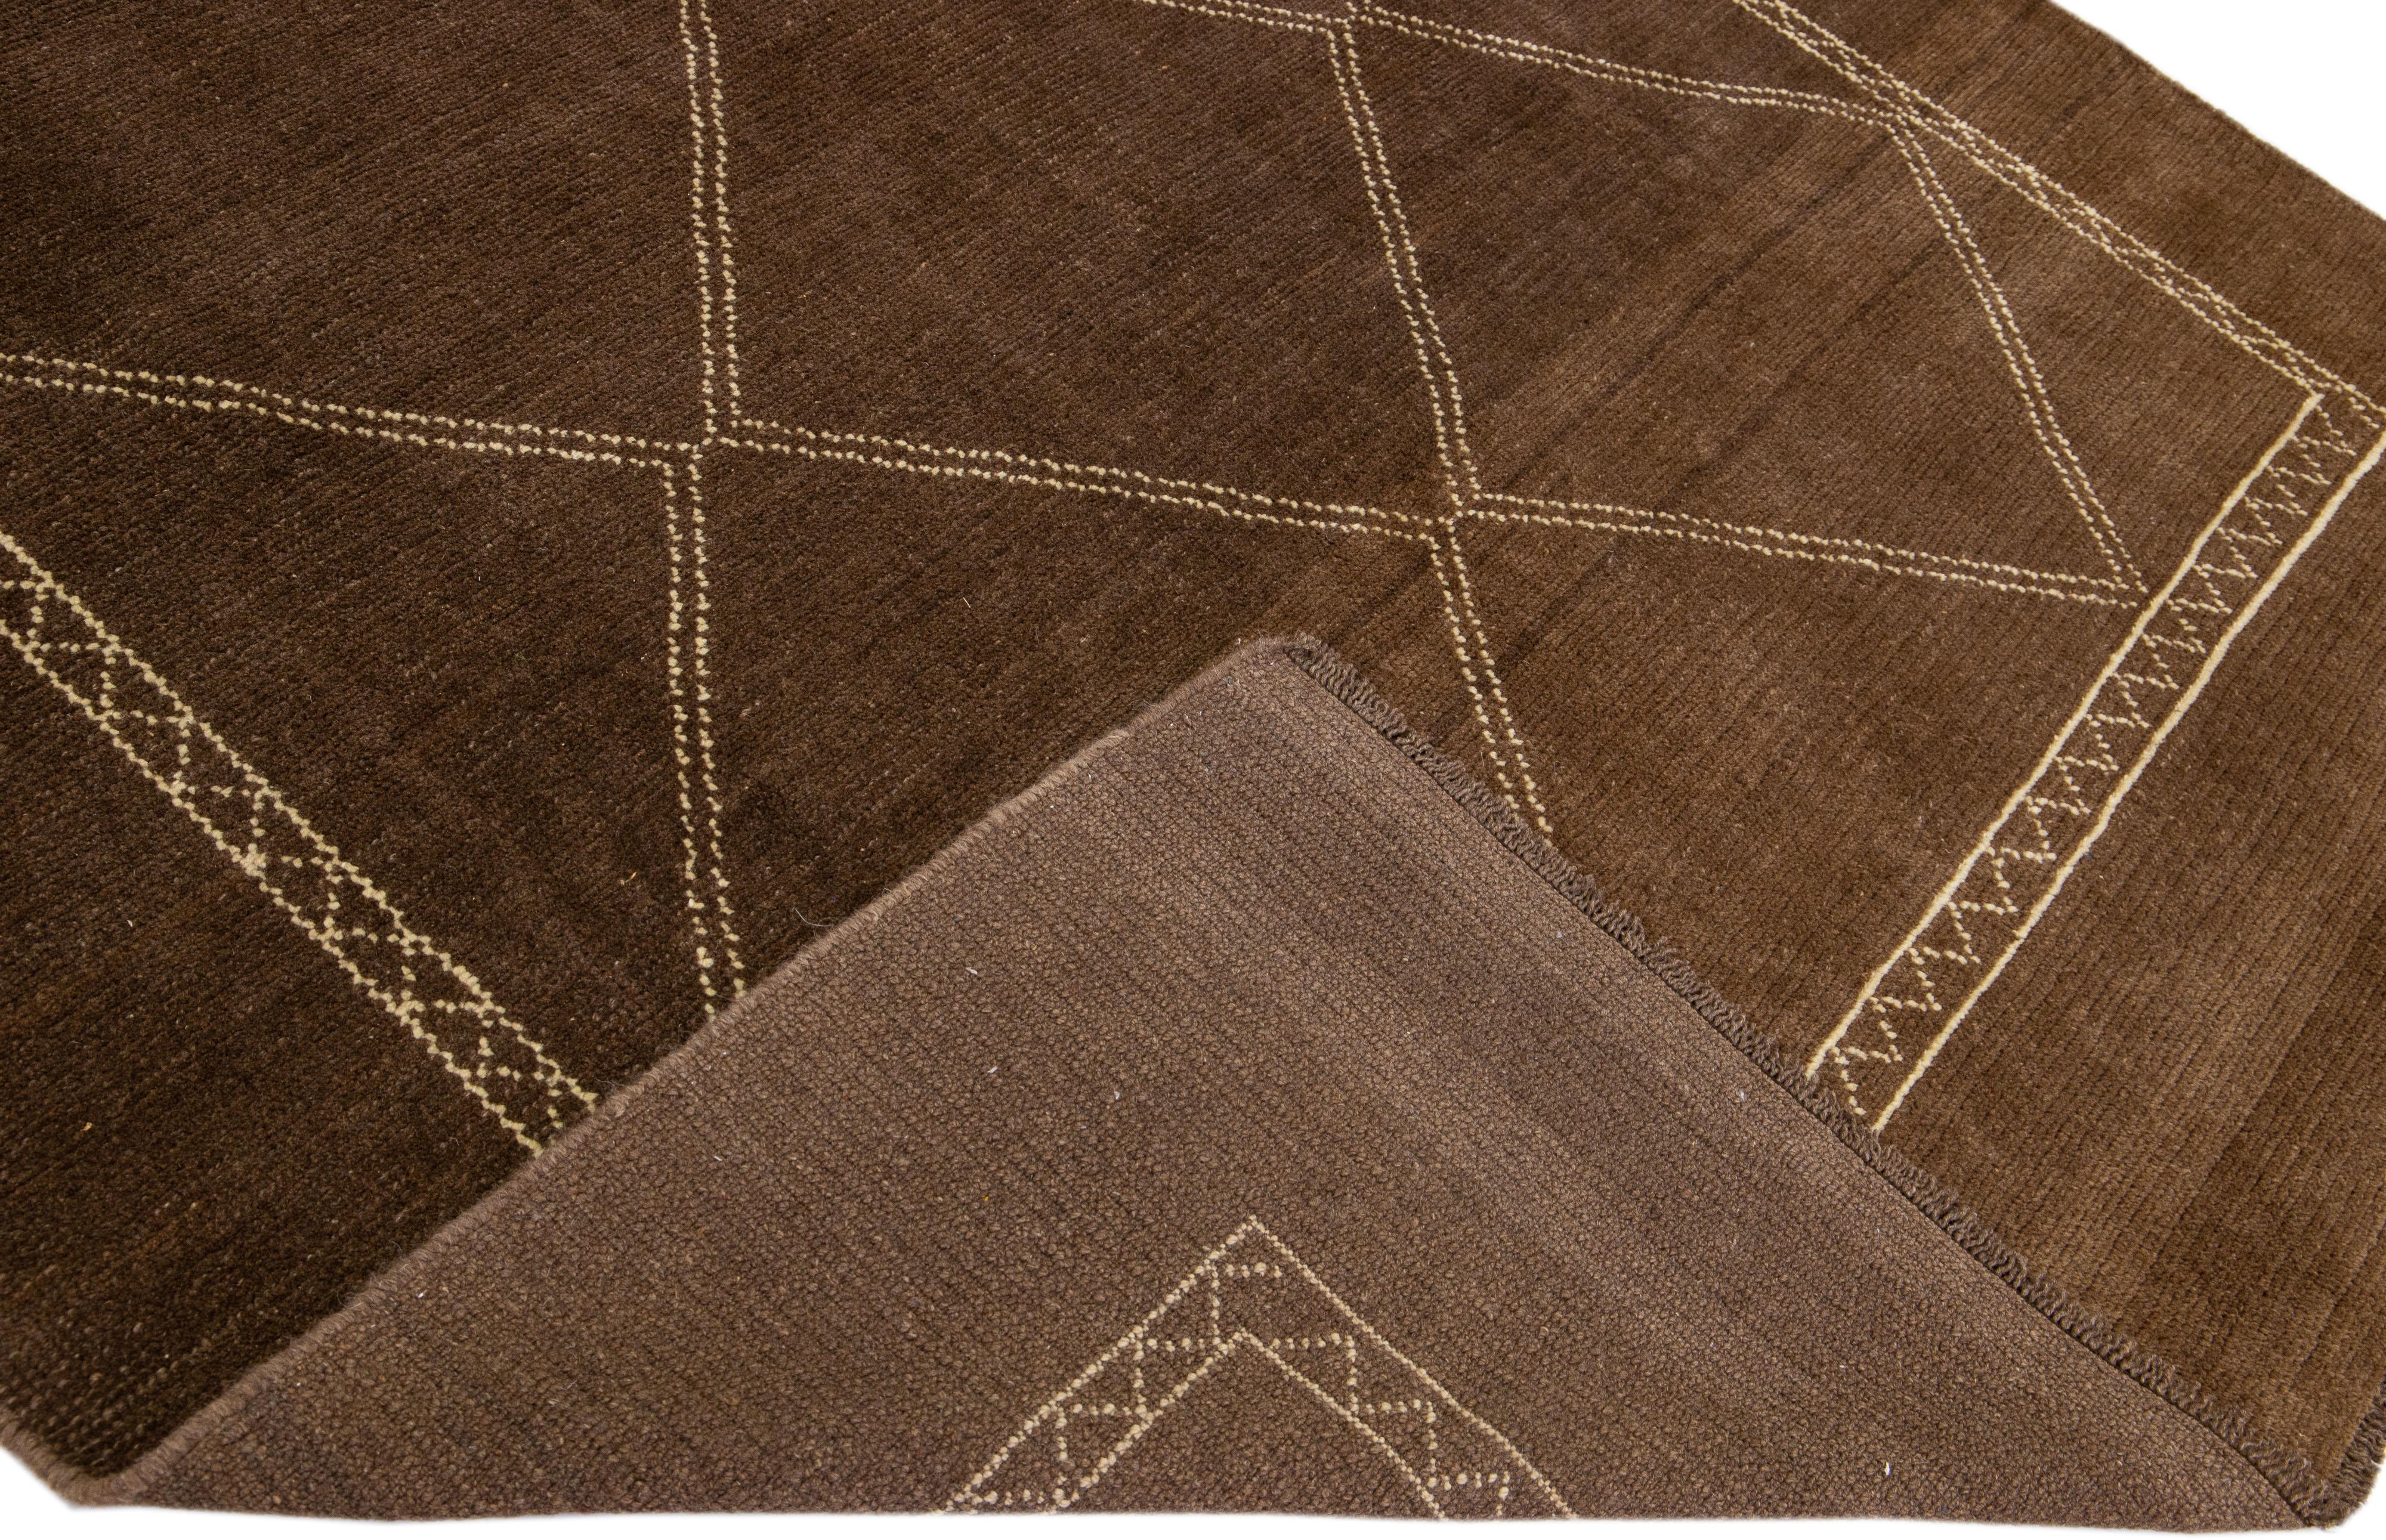 This Beautiful Moroccan-style handmade wool rug makes part of our Northwest collection and features a brown color field and beige accents in a gorgeous geometric tribal design.

This rug measures: 6'10